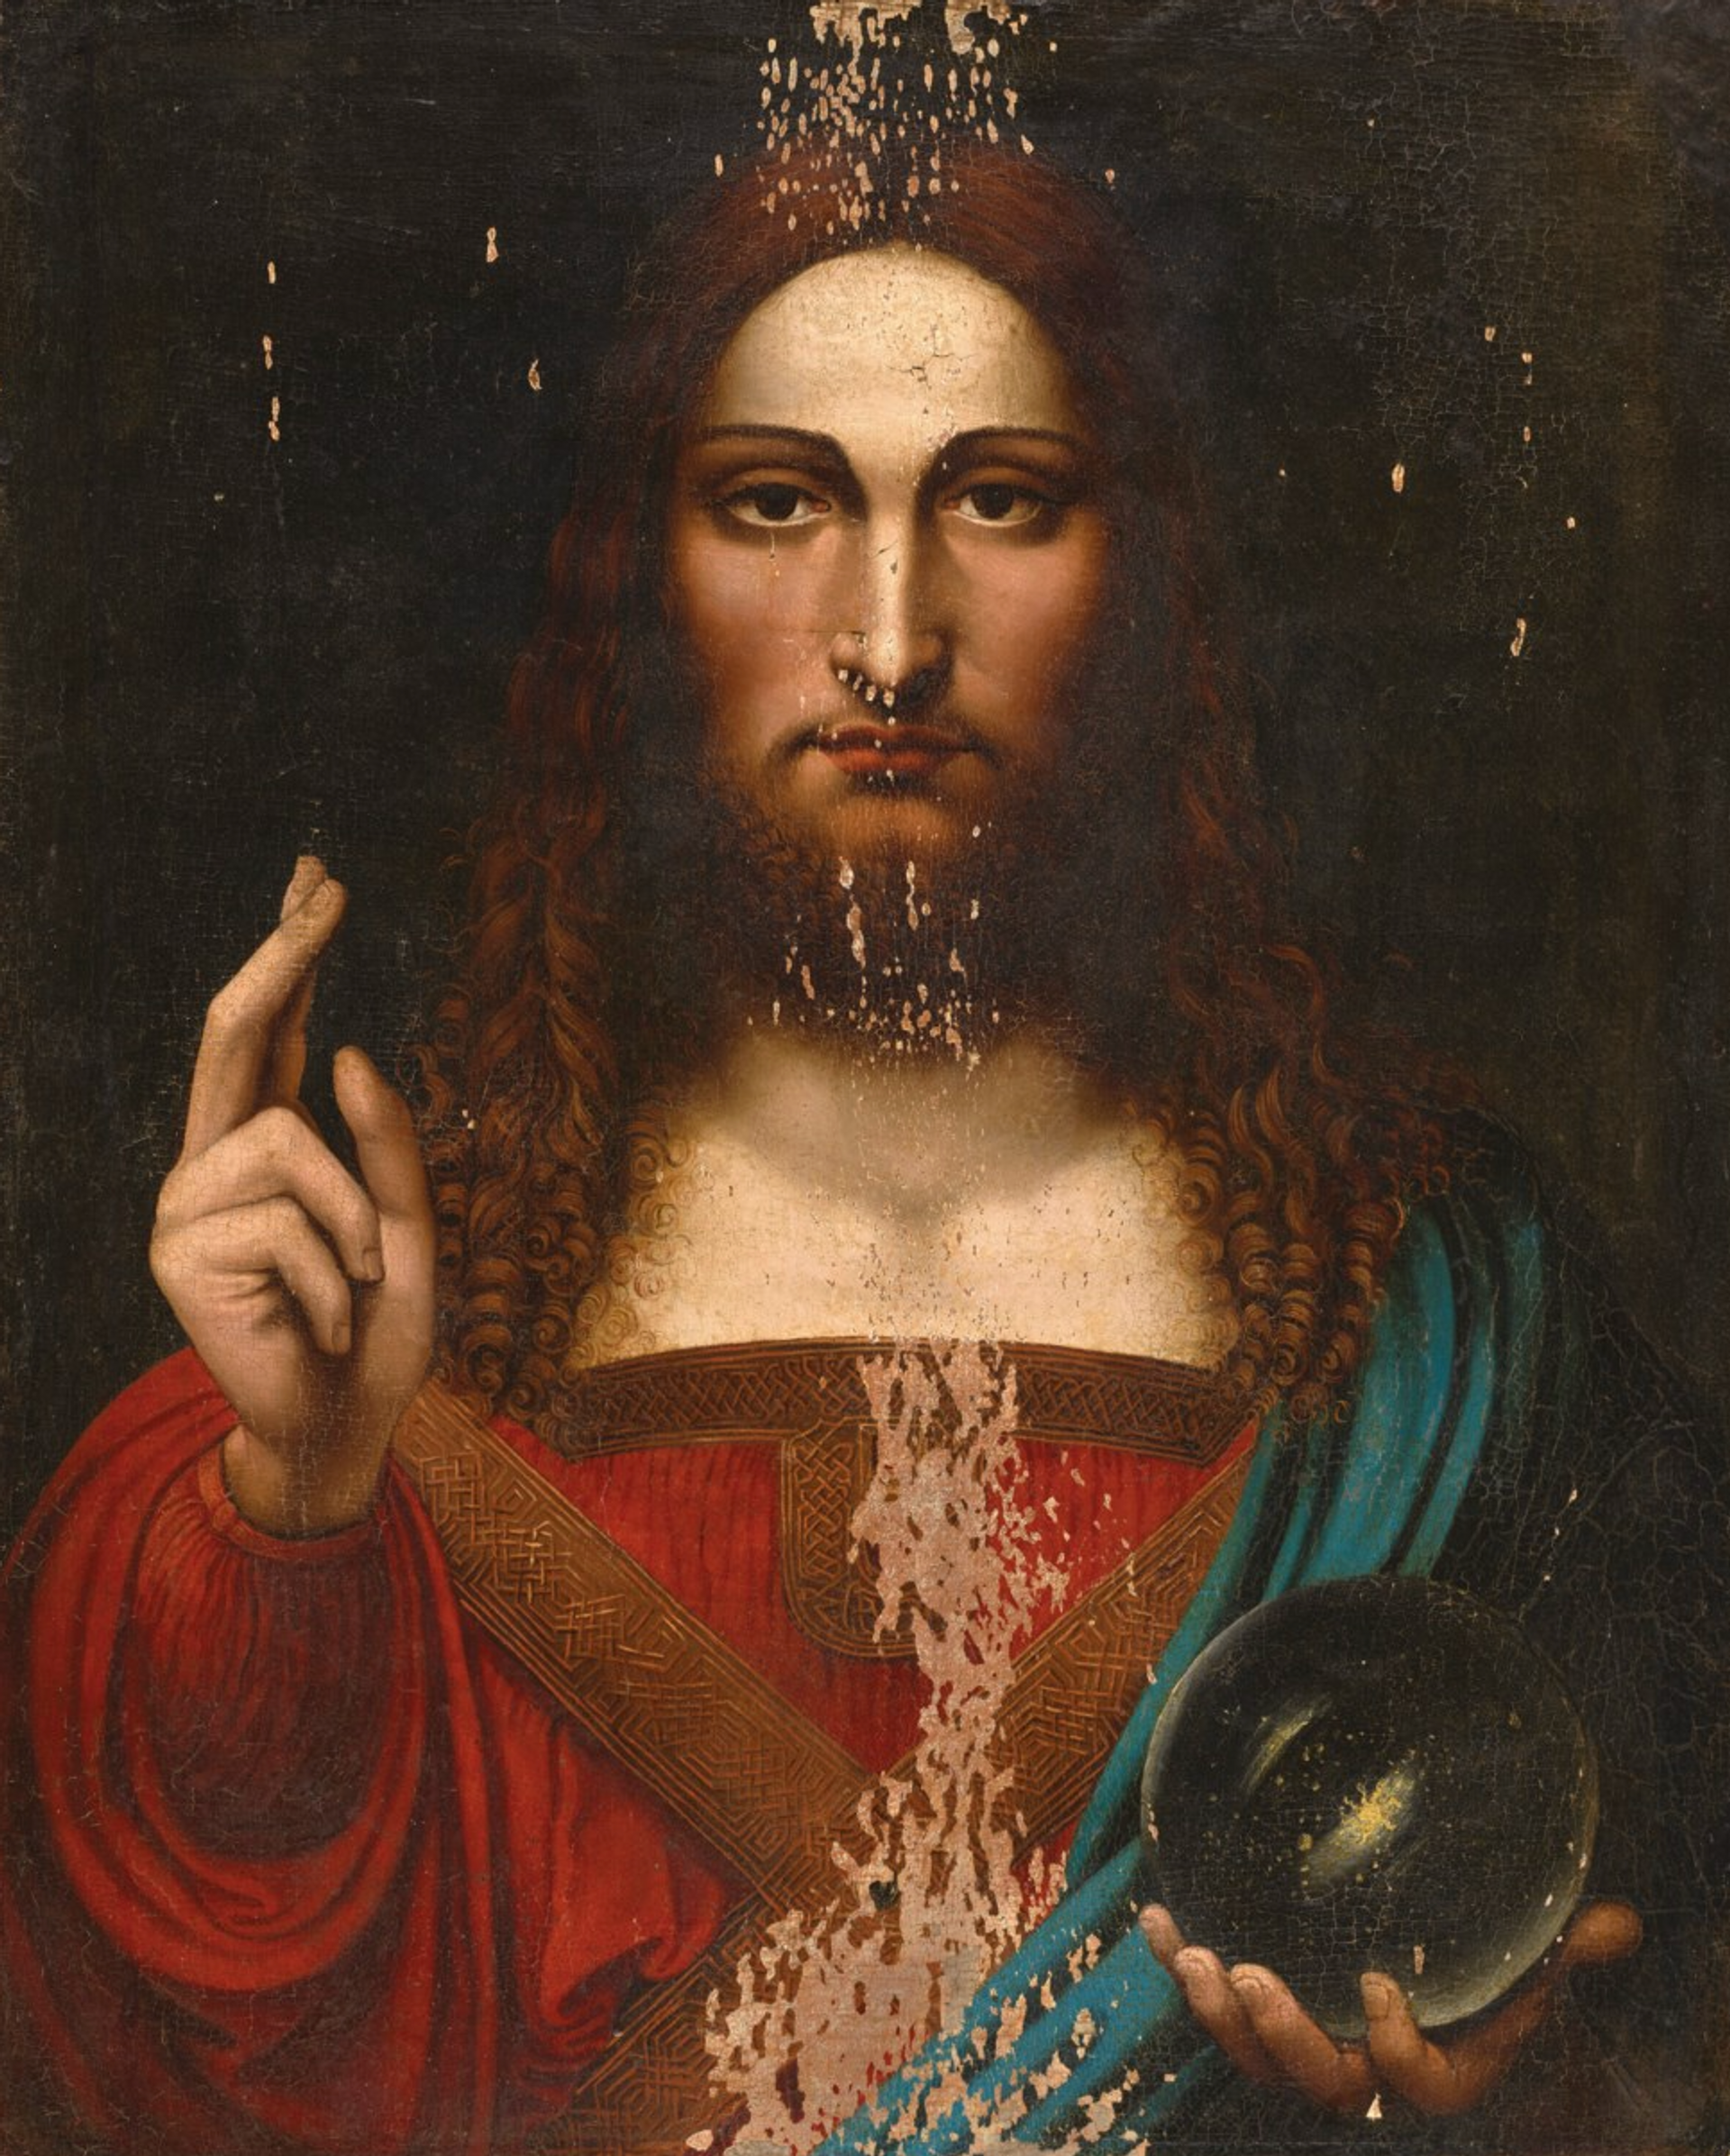 A Salvator Mundi, after Leonardo (around 1600), was sold for €1m at Christie's. Courtesy of Christie's